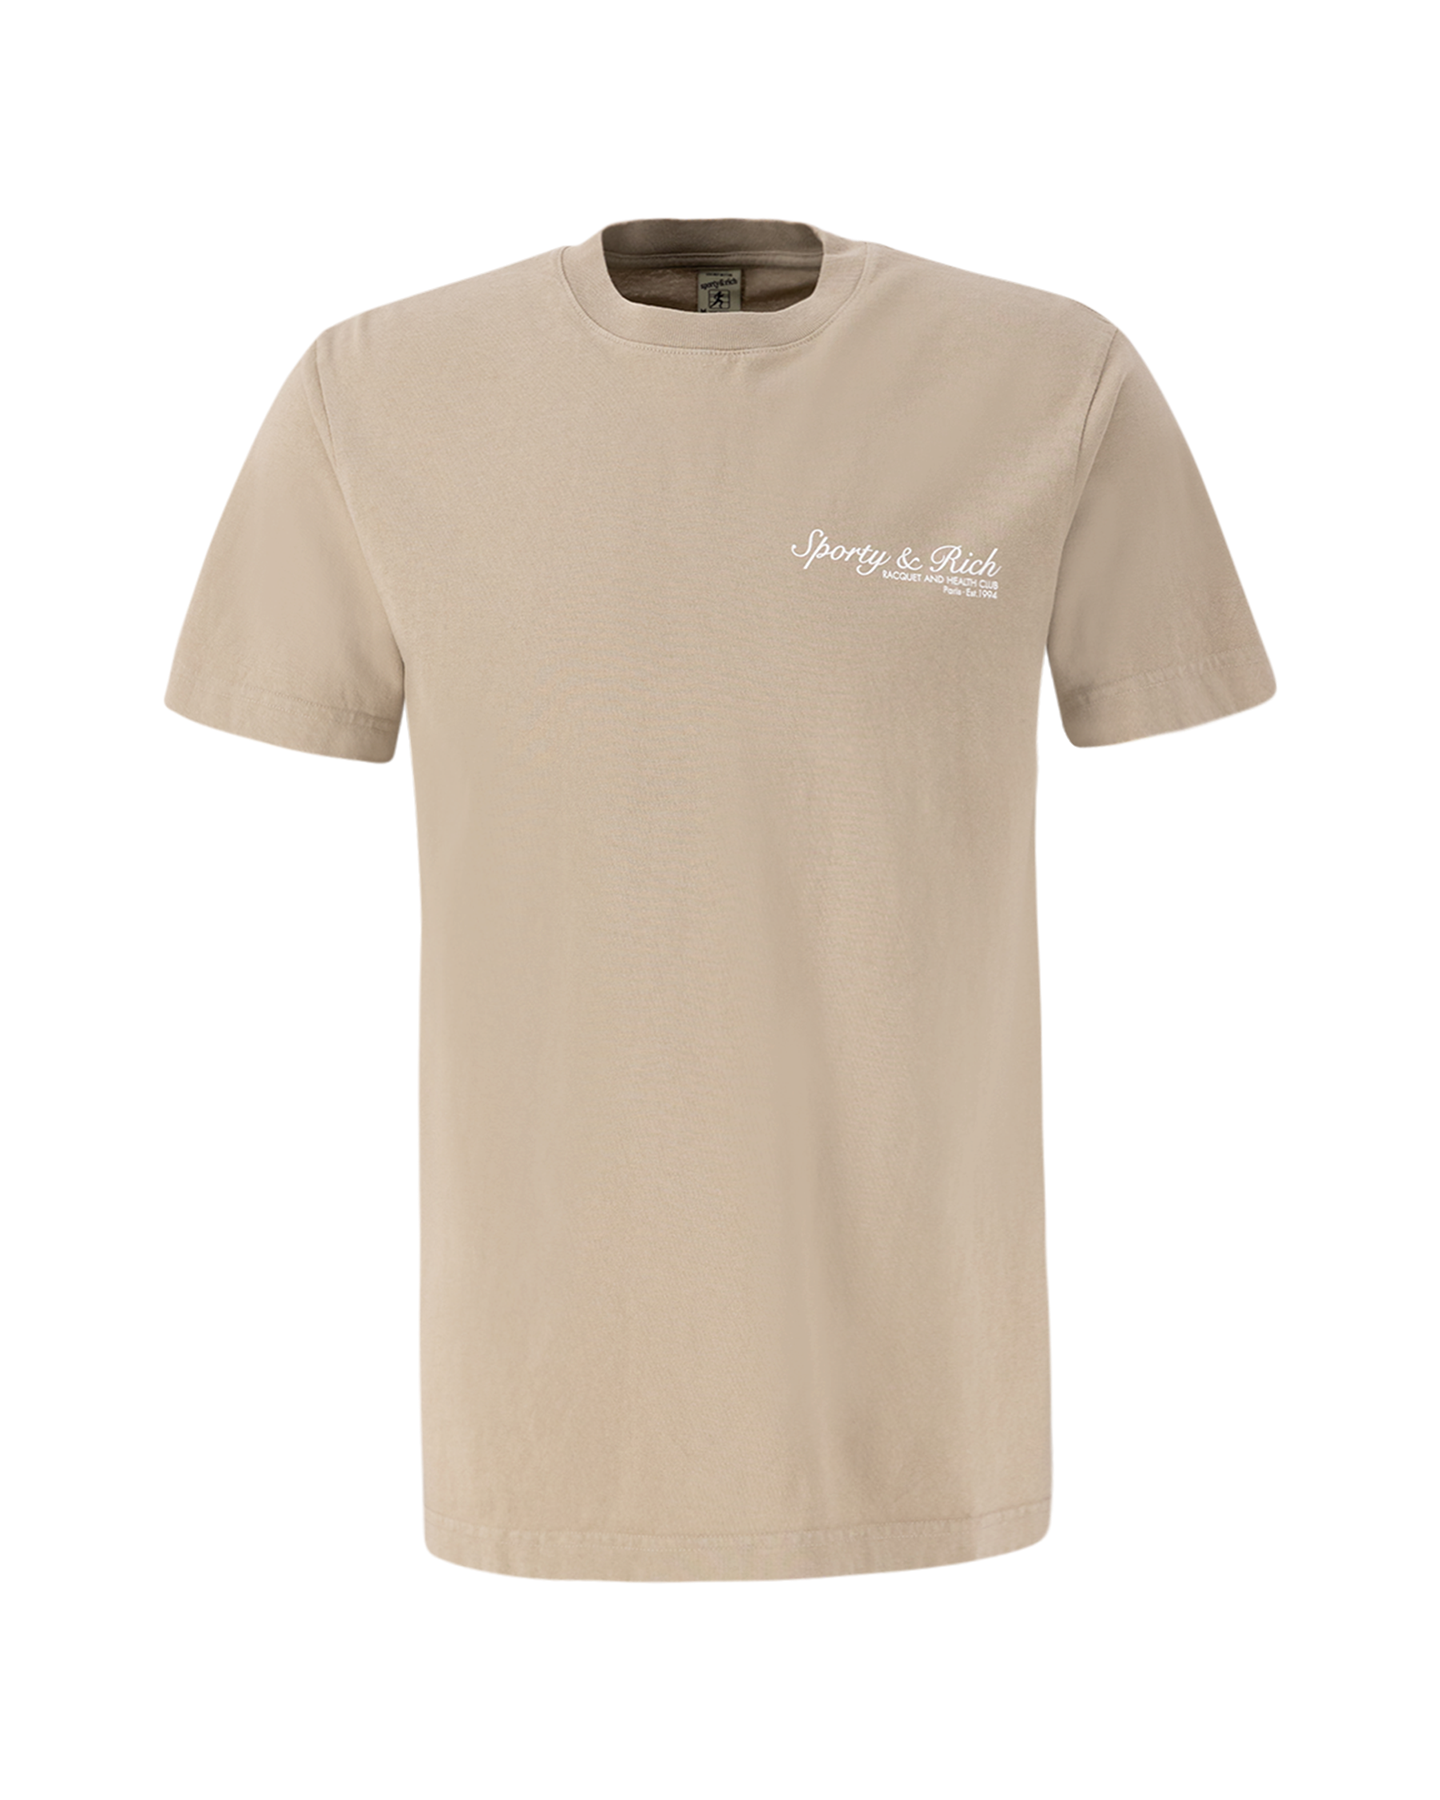 Sporty & Rich French Tee Shirt CREME 2